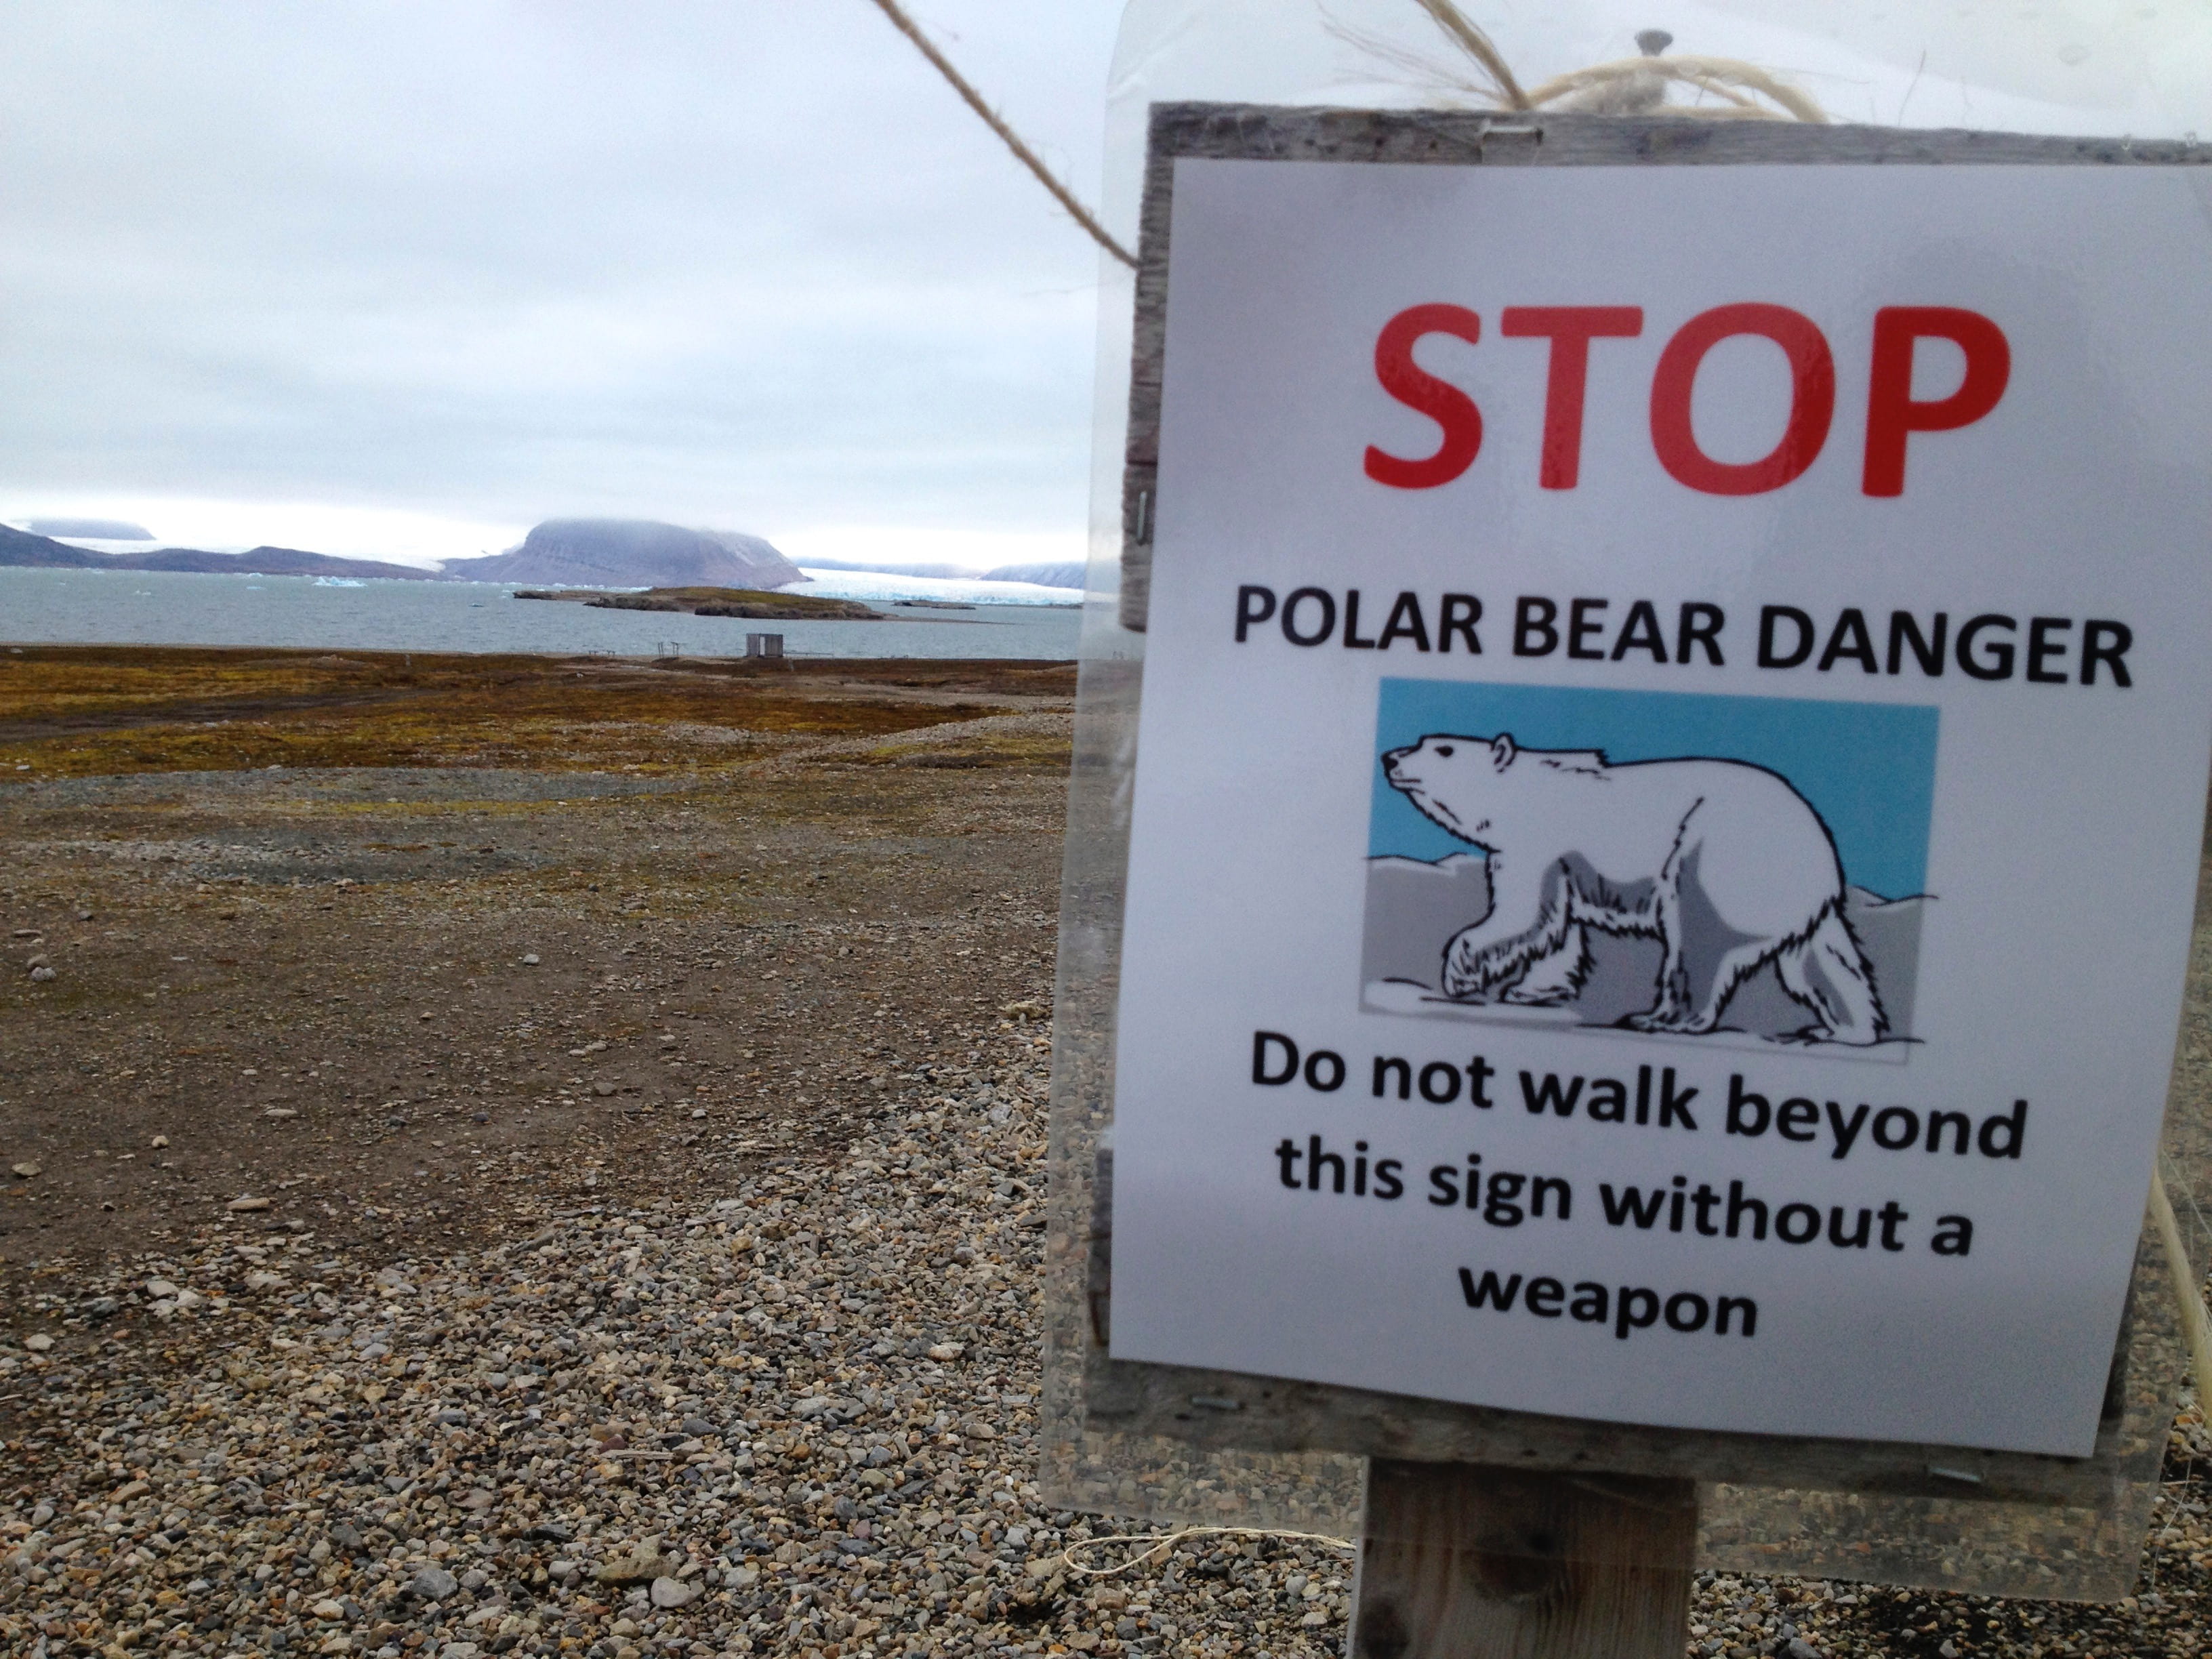  Some of my research in Norway was conducted in the research town of Ny-Ålesund on the island of Svalbard. They had polar bear warning signs posted around the town.